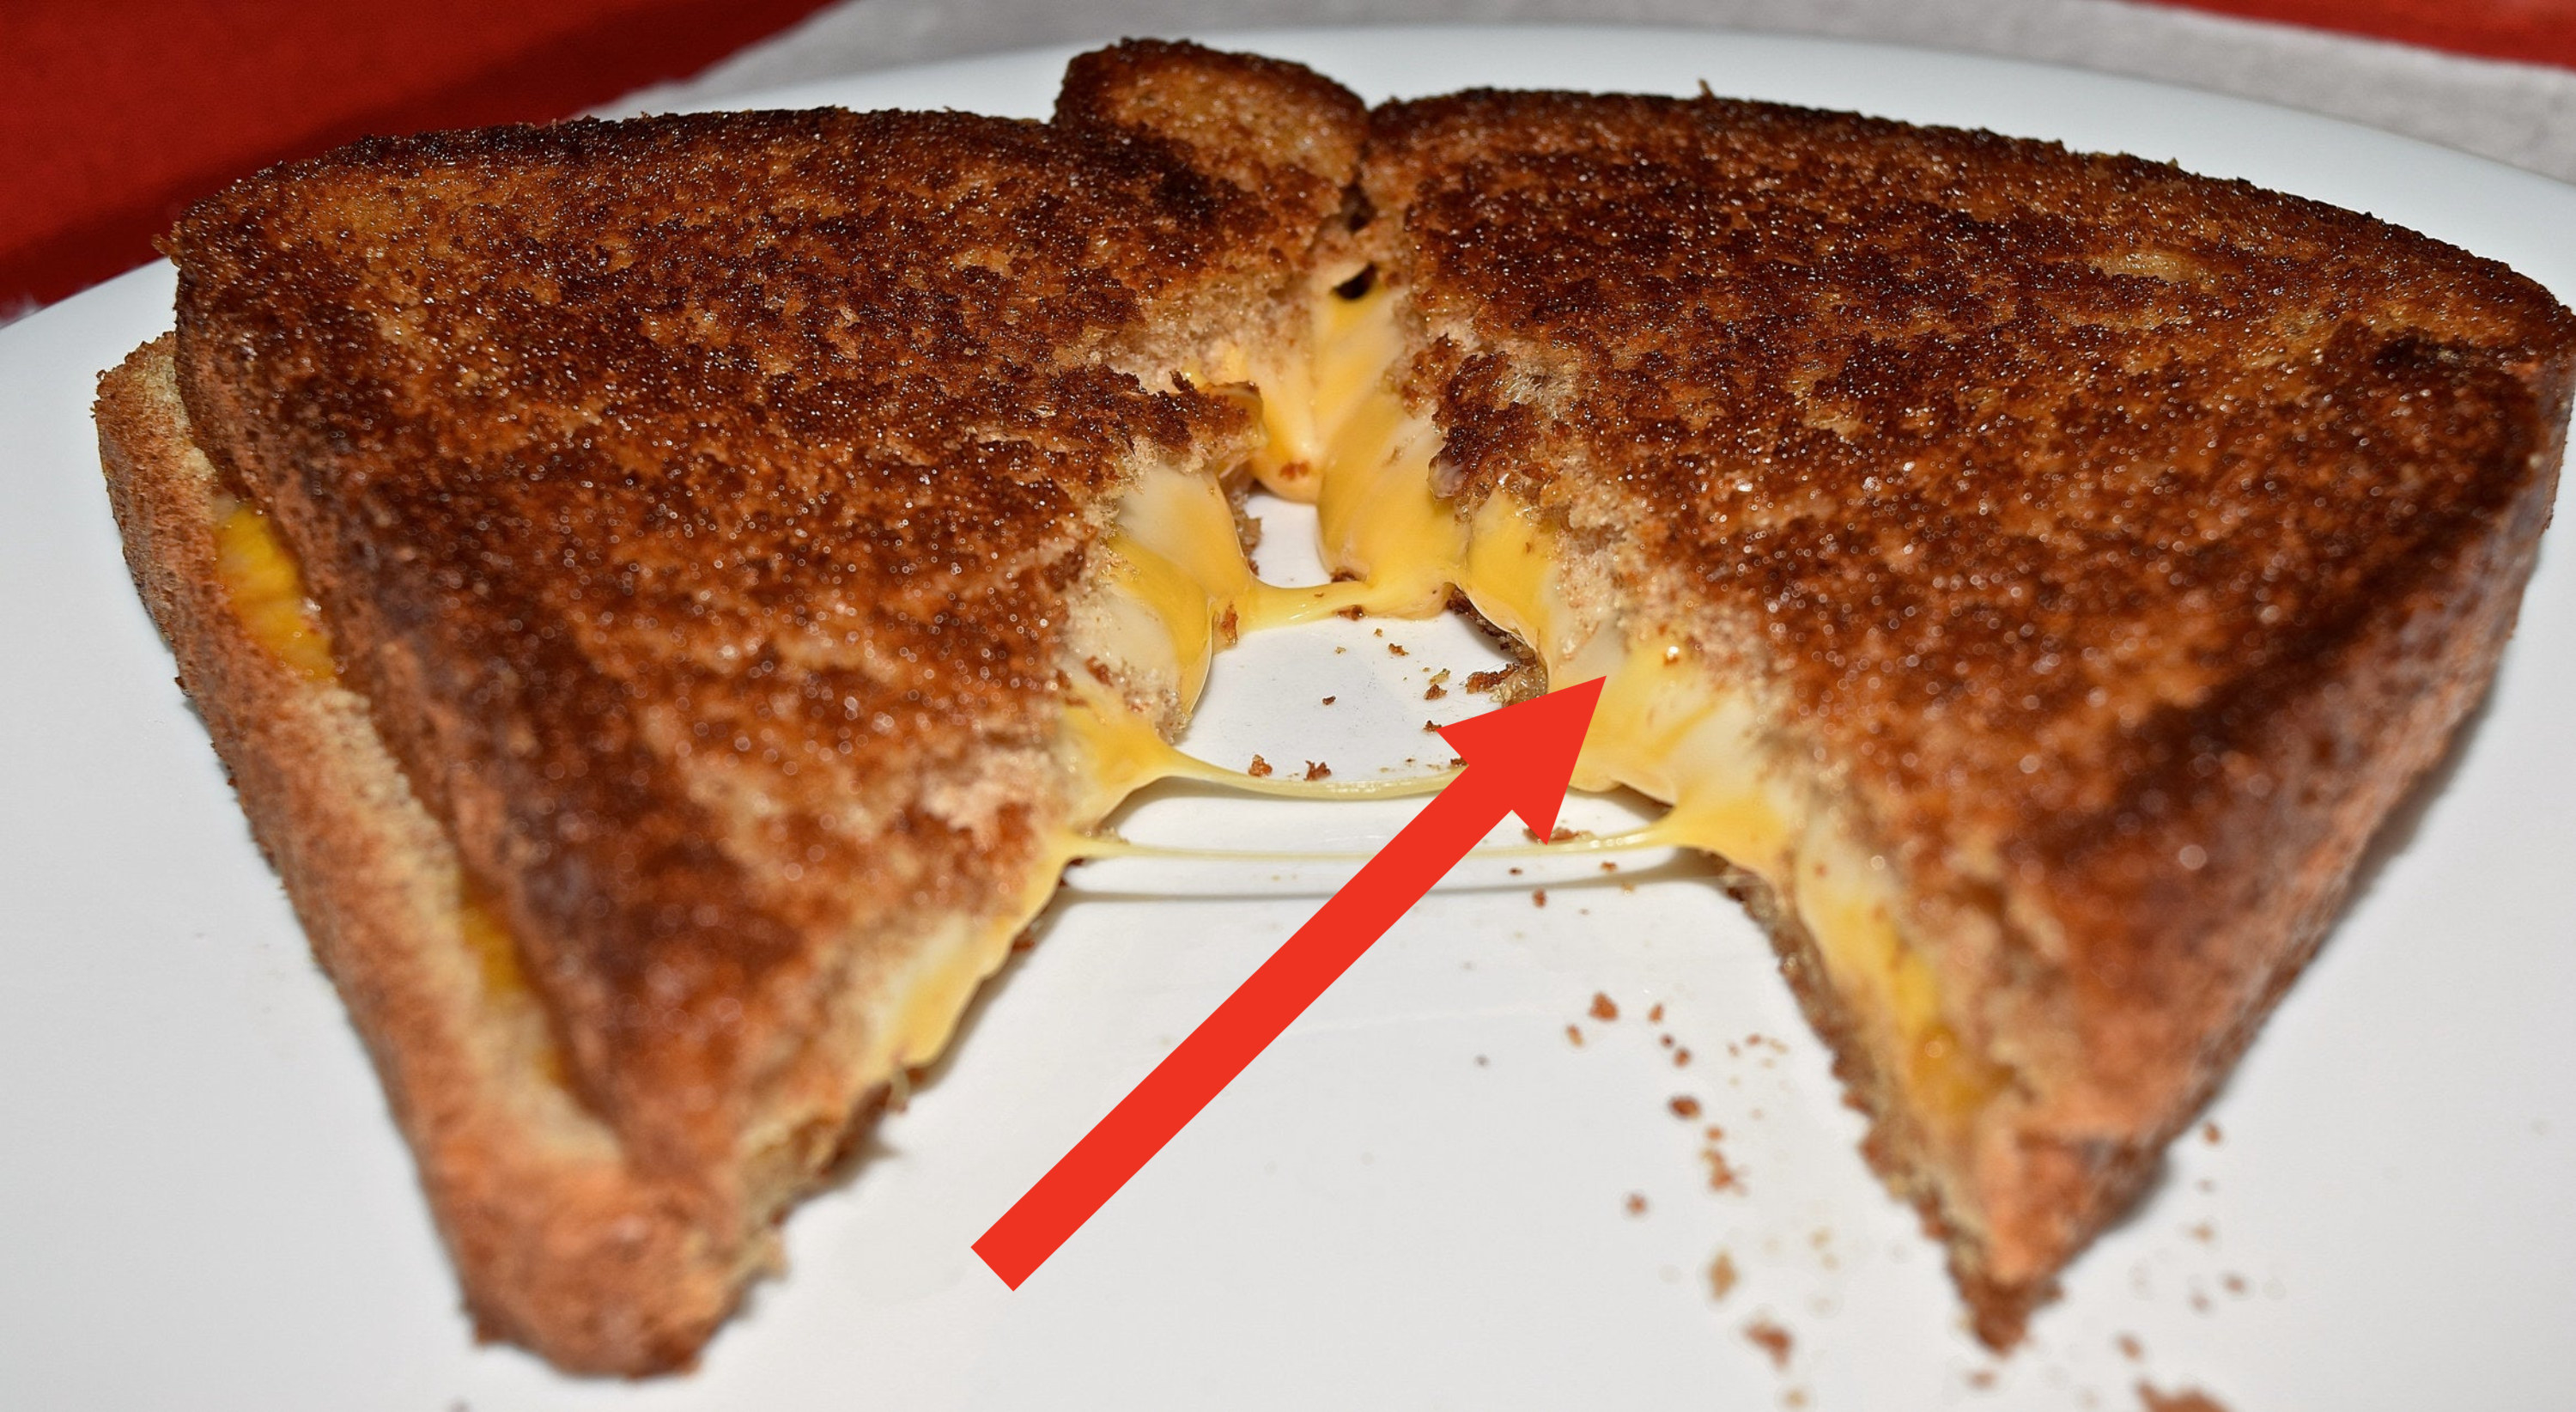 A grilled cheese sandwich sliced in half.